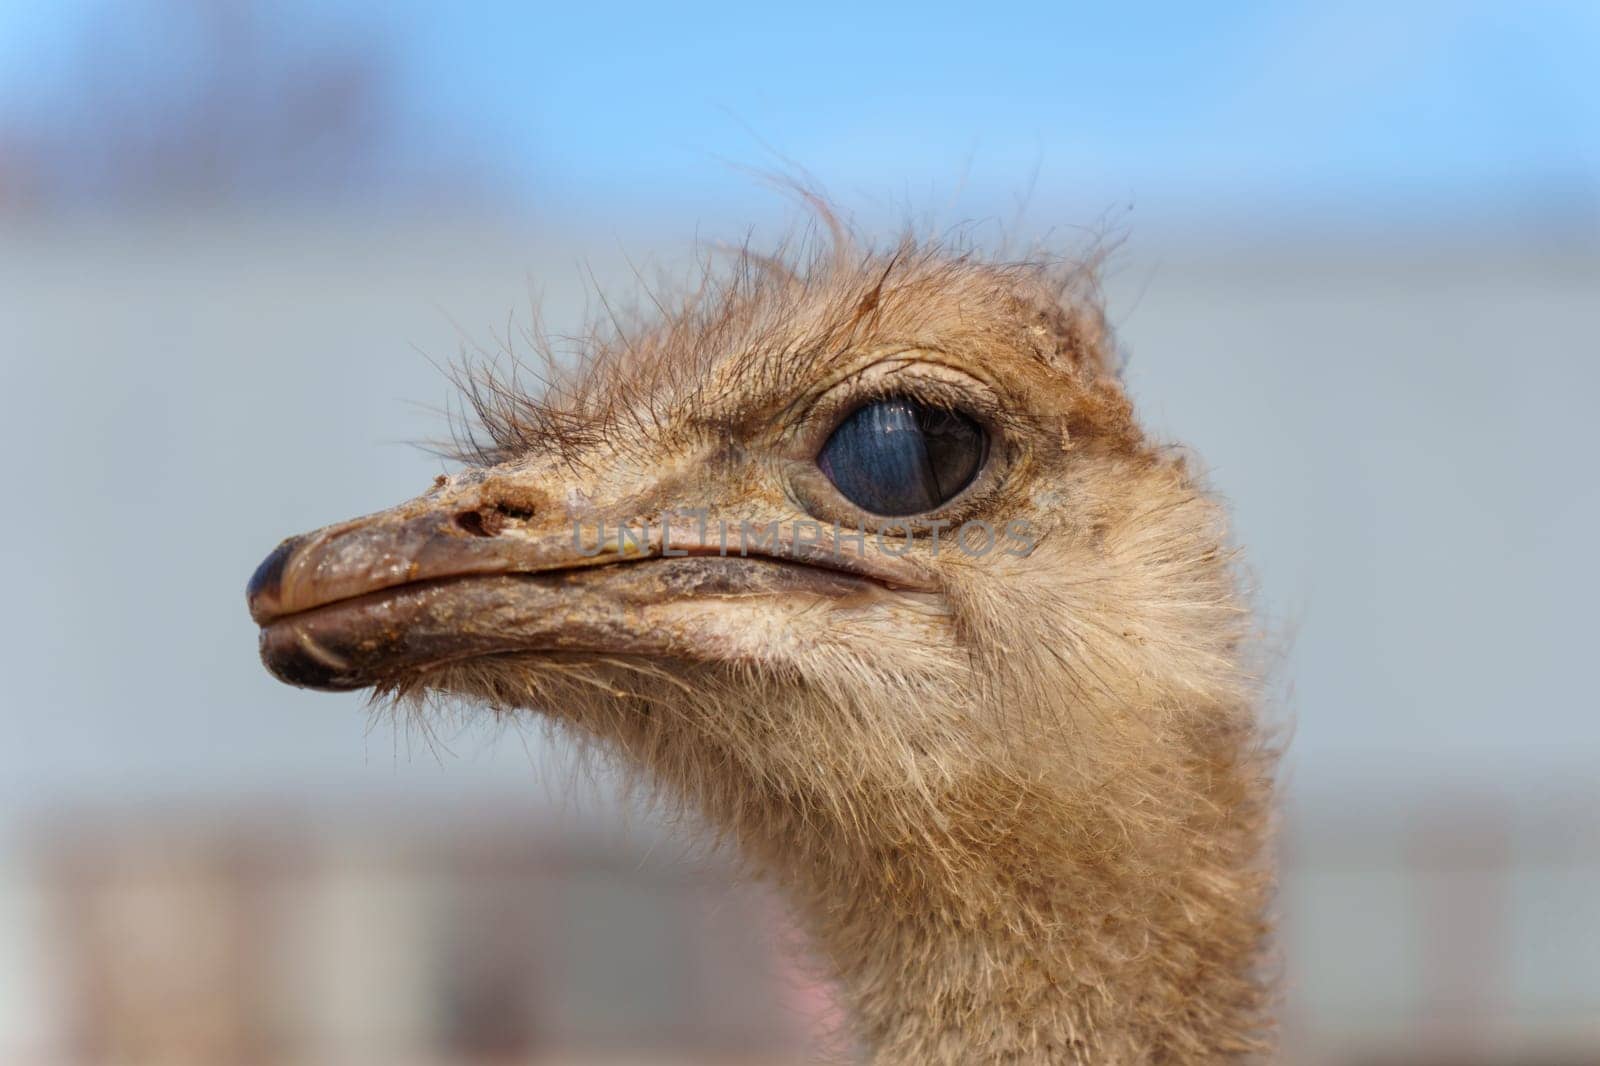 Ostriches with long necks and large eyes are standing peacefully side by side in a pen on farm